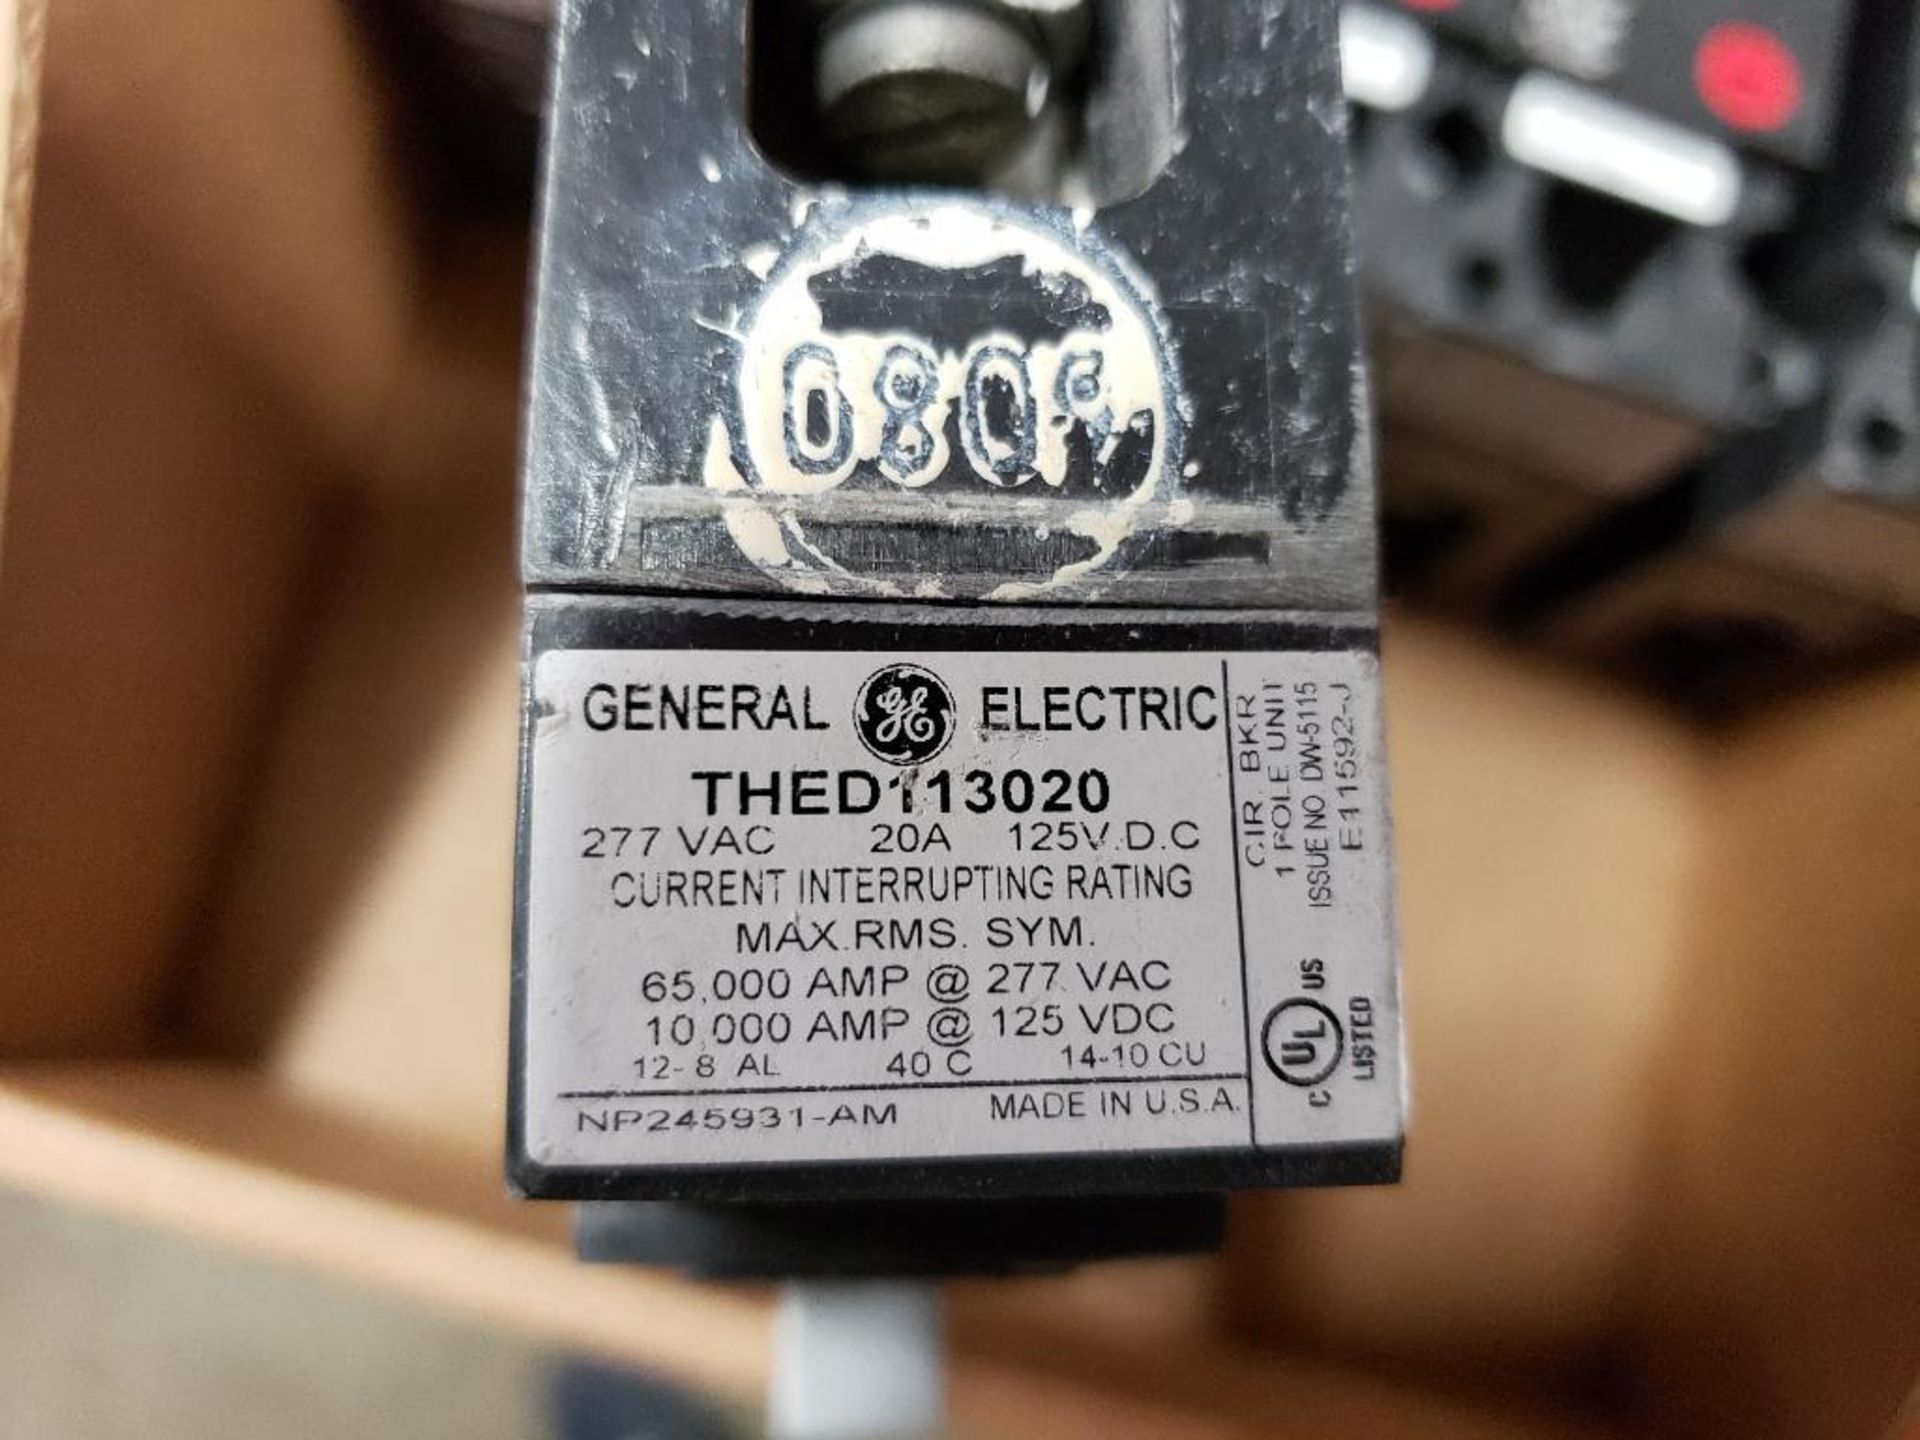 Qty 6 - GE 20AMP THED1113020 circuit breaker. - Image 5 of 6